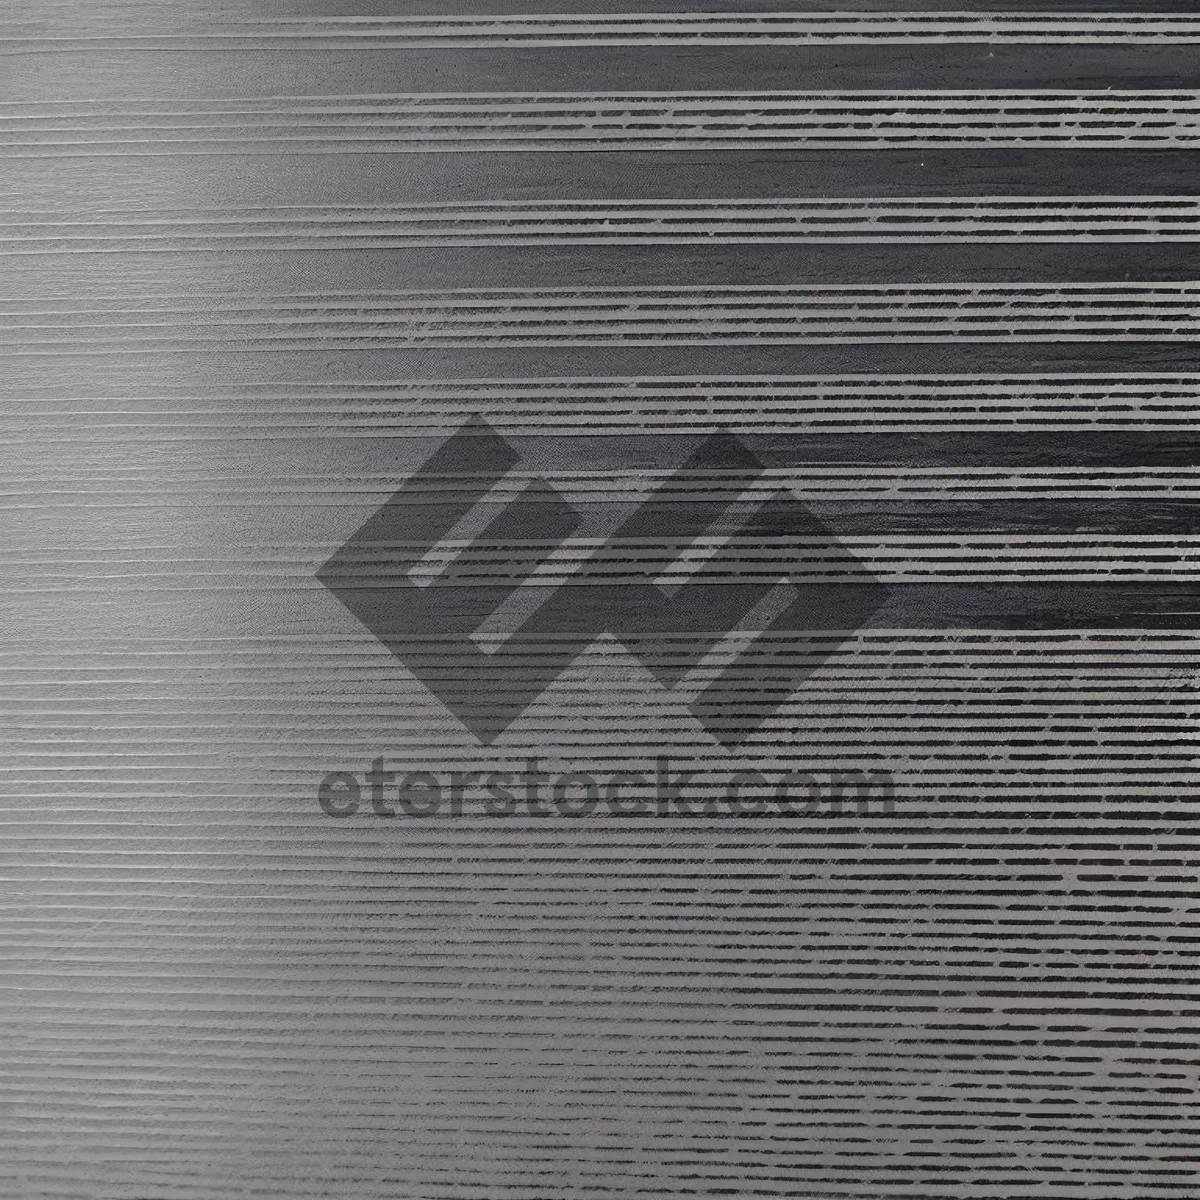 Picture of Textured Silver Fabric Pattern on Metal Panel